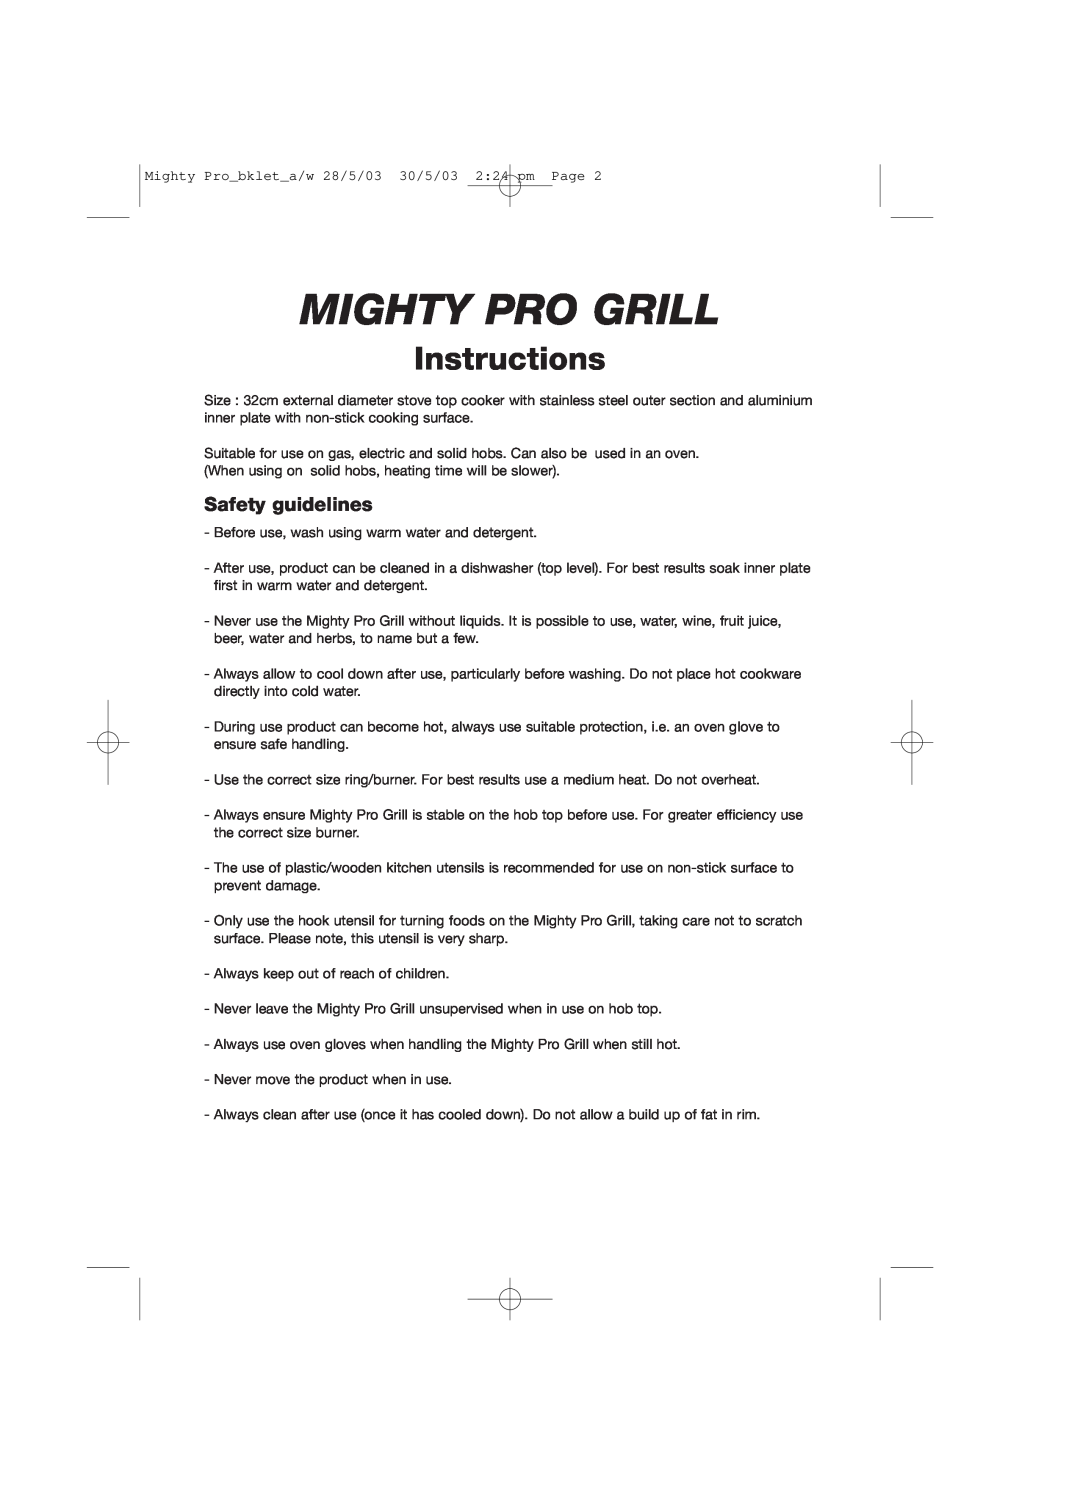 John Mills Mighty Pro Grill manual Safety guidelines, Instructions 